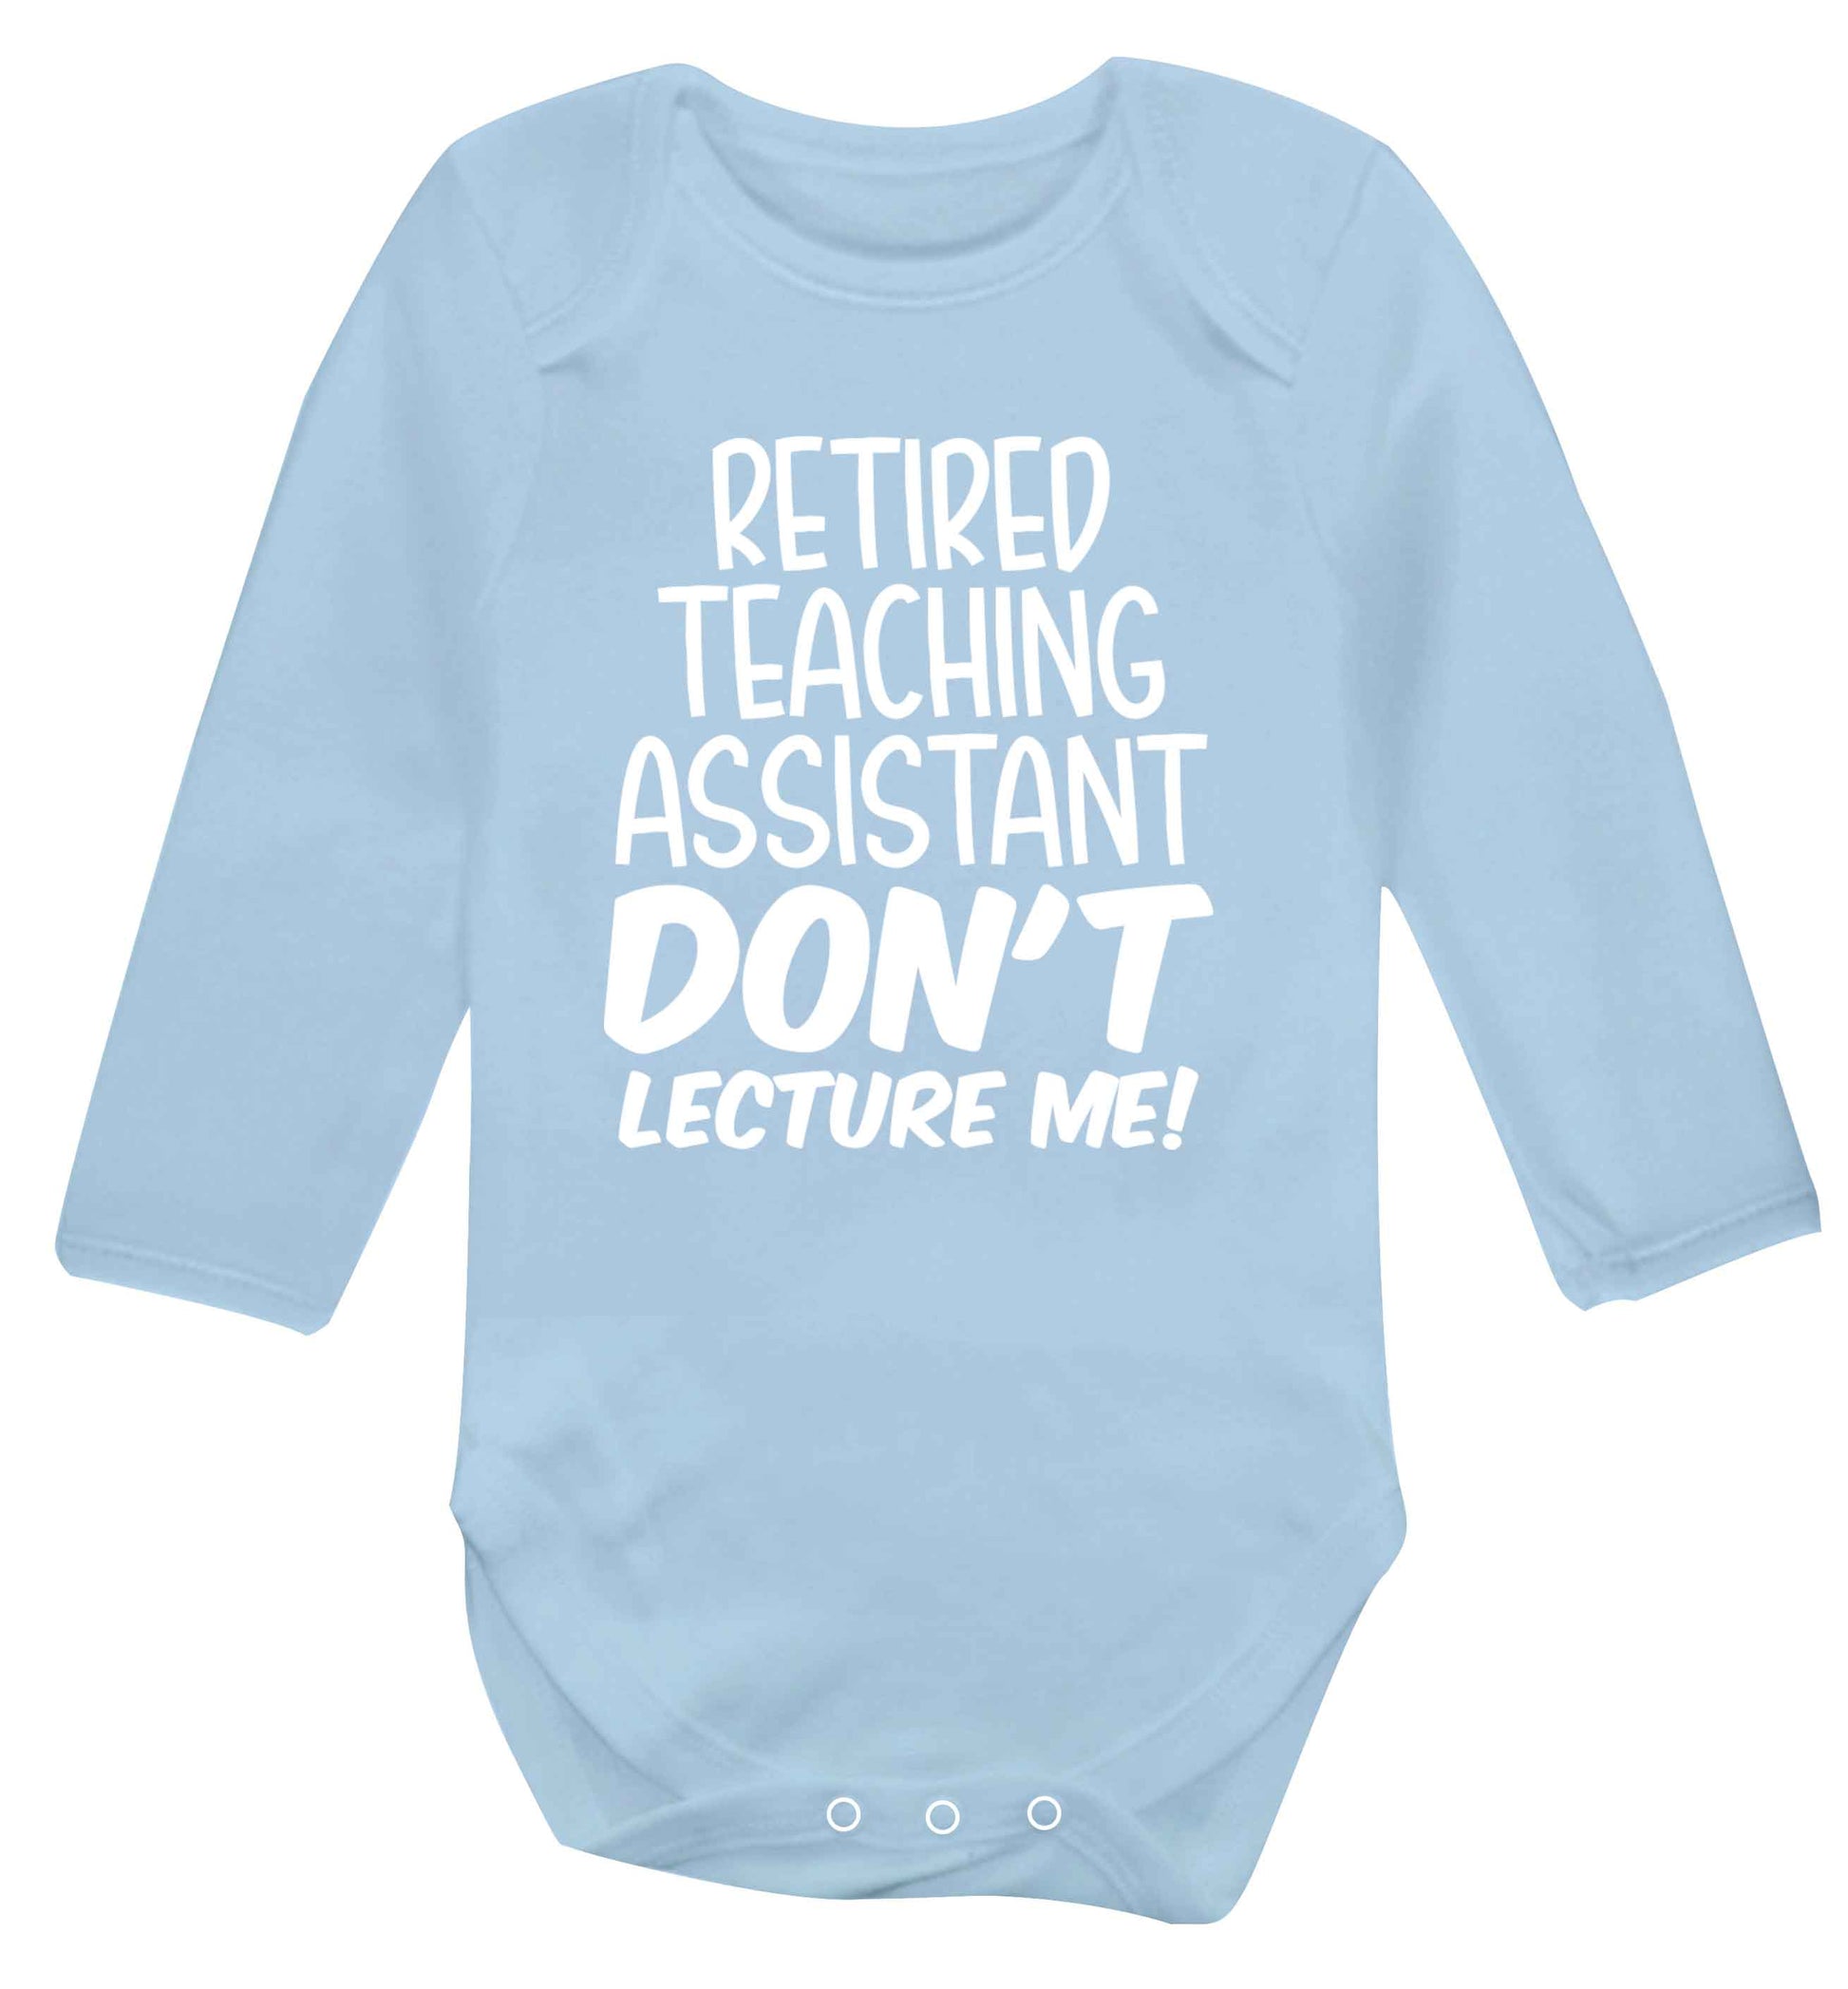 Retired teaching assistant don't lecture me Baby Vest long sleeved pale blue 6-12 months